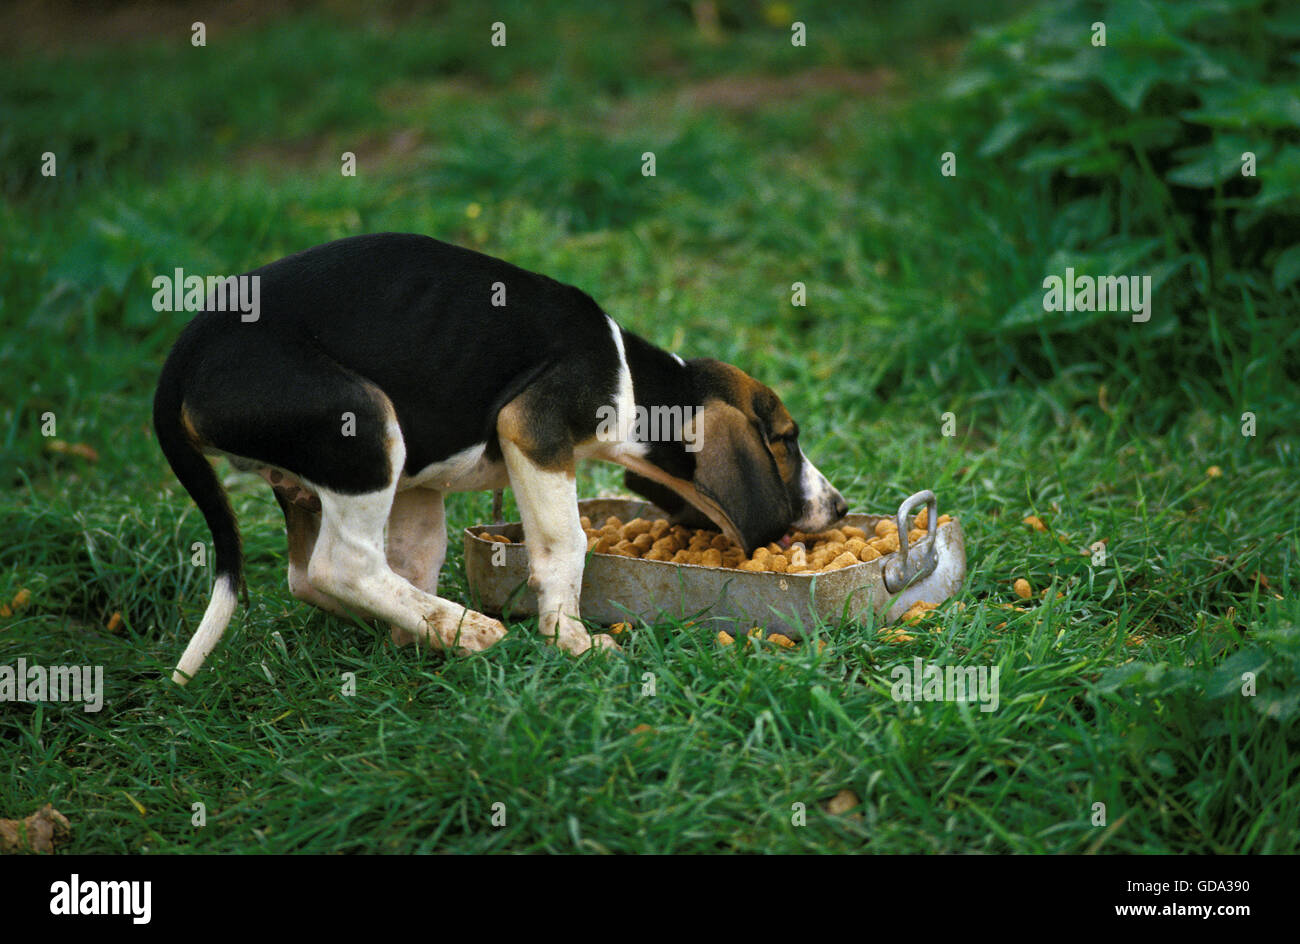 Great Anglo-French Tricolour Hound, Pup Eating Food Stock Photo